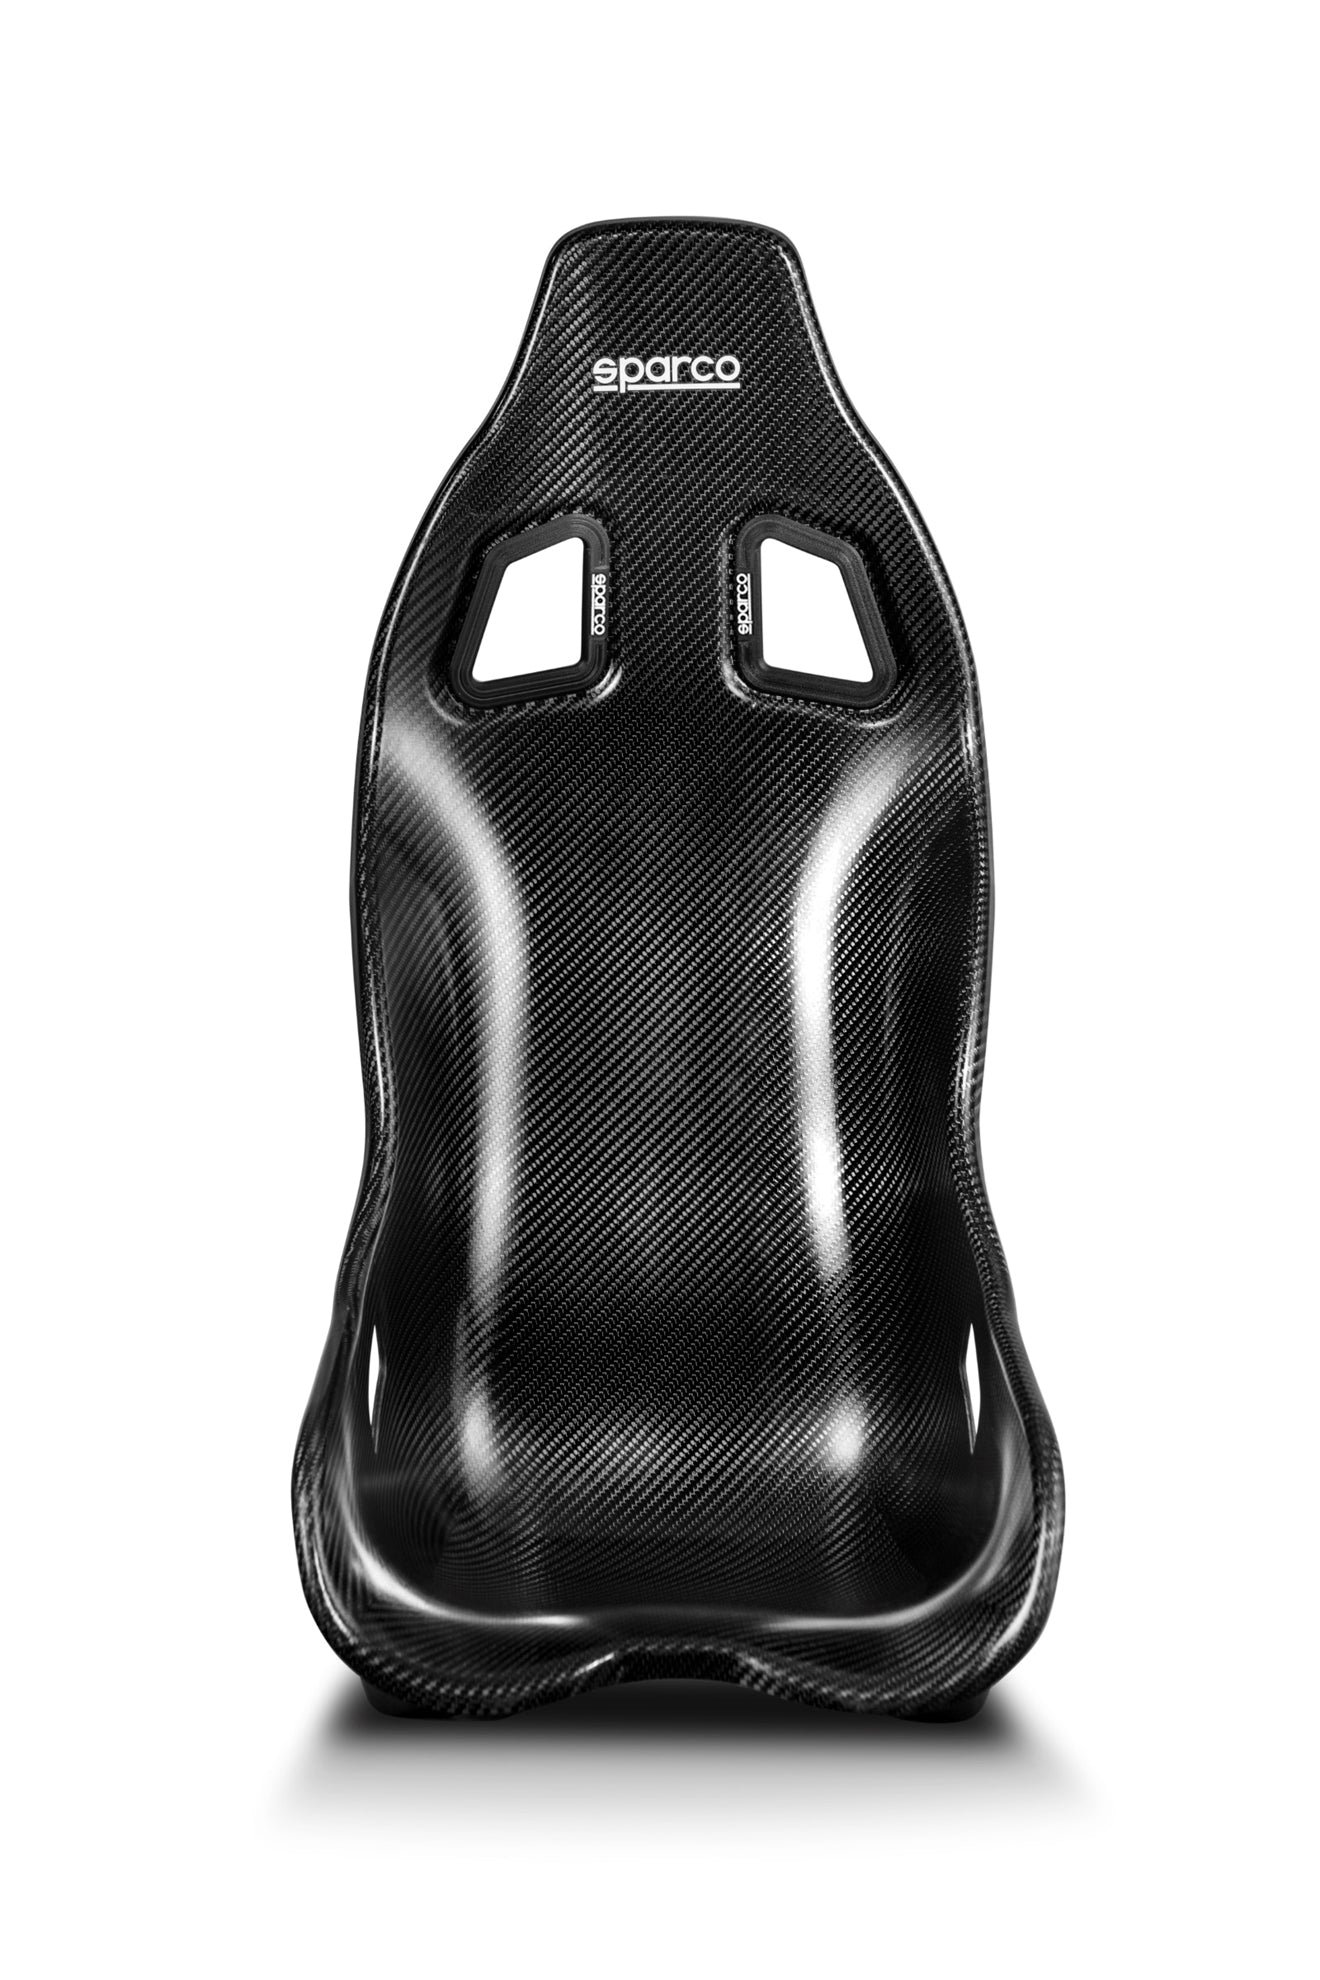 Sparco Ultra Carbon